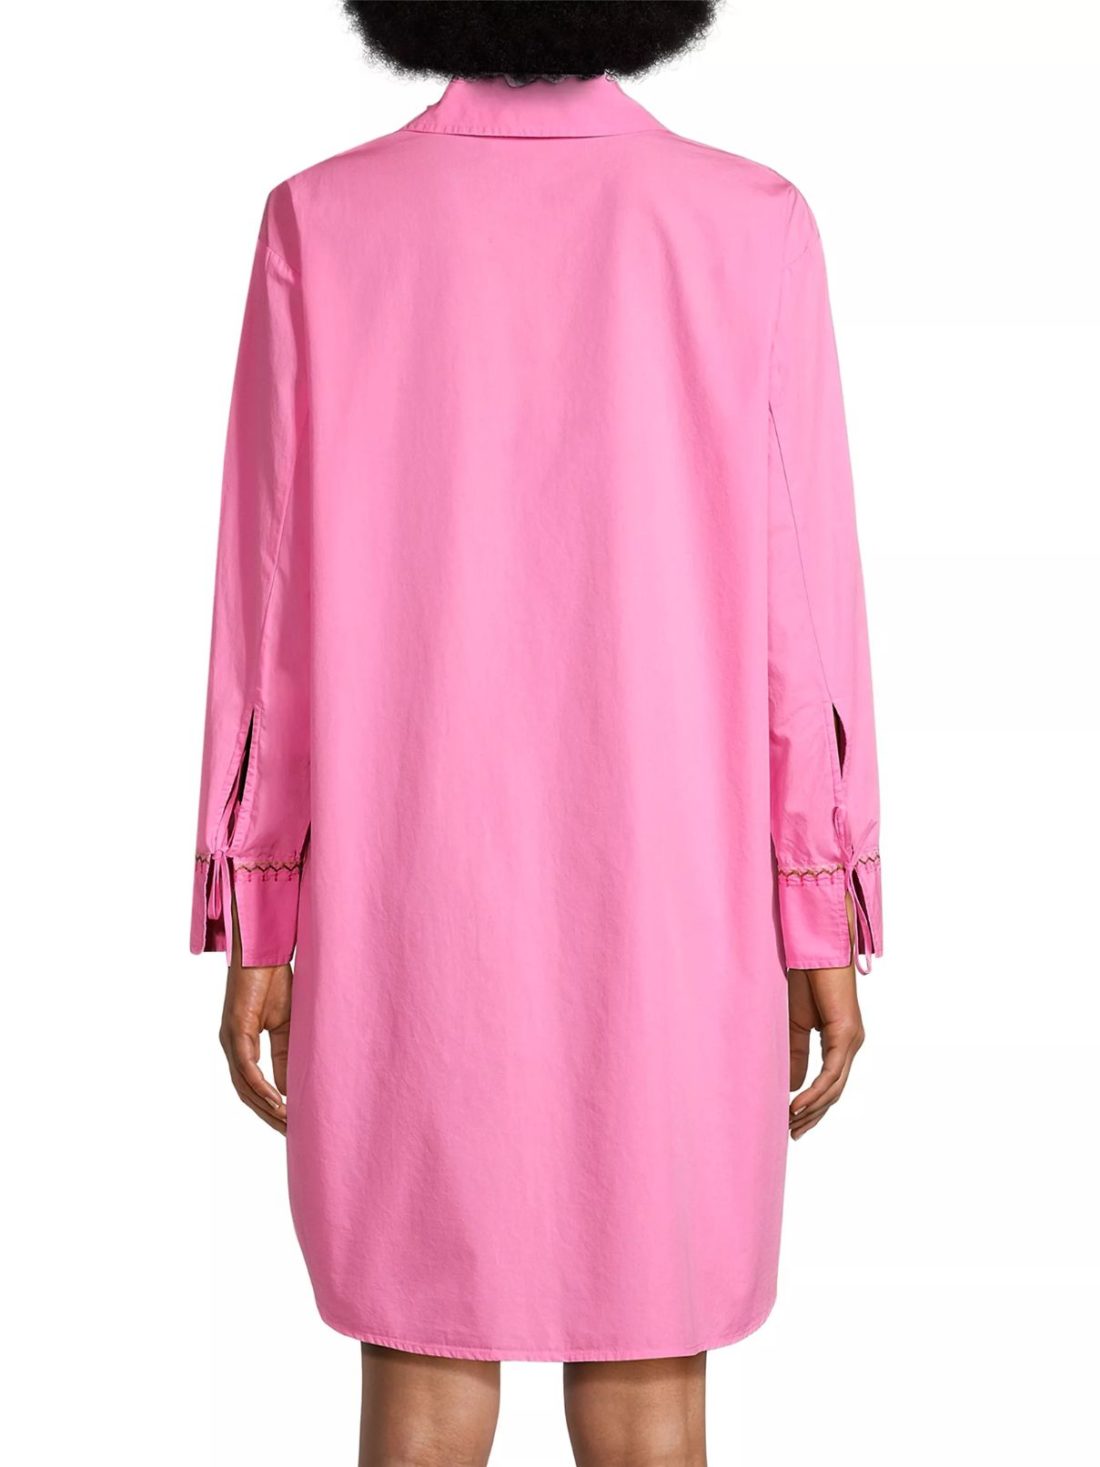 johnny was camellia ruched sleeve dress in spring rose